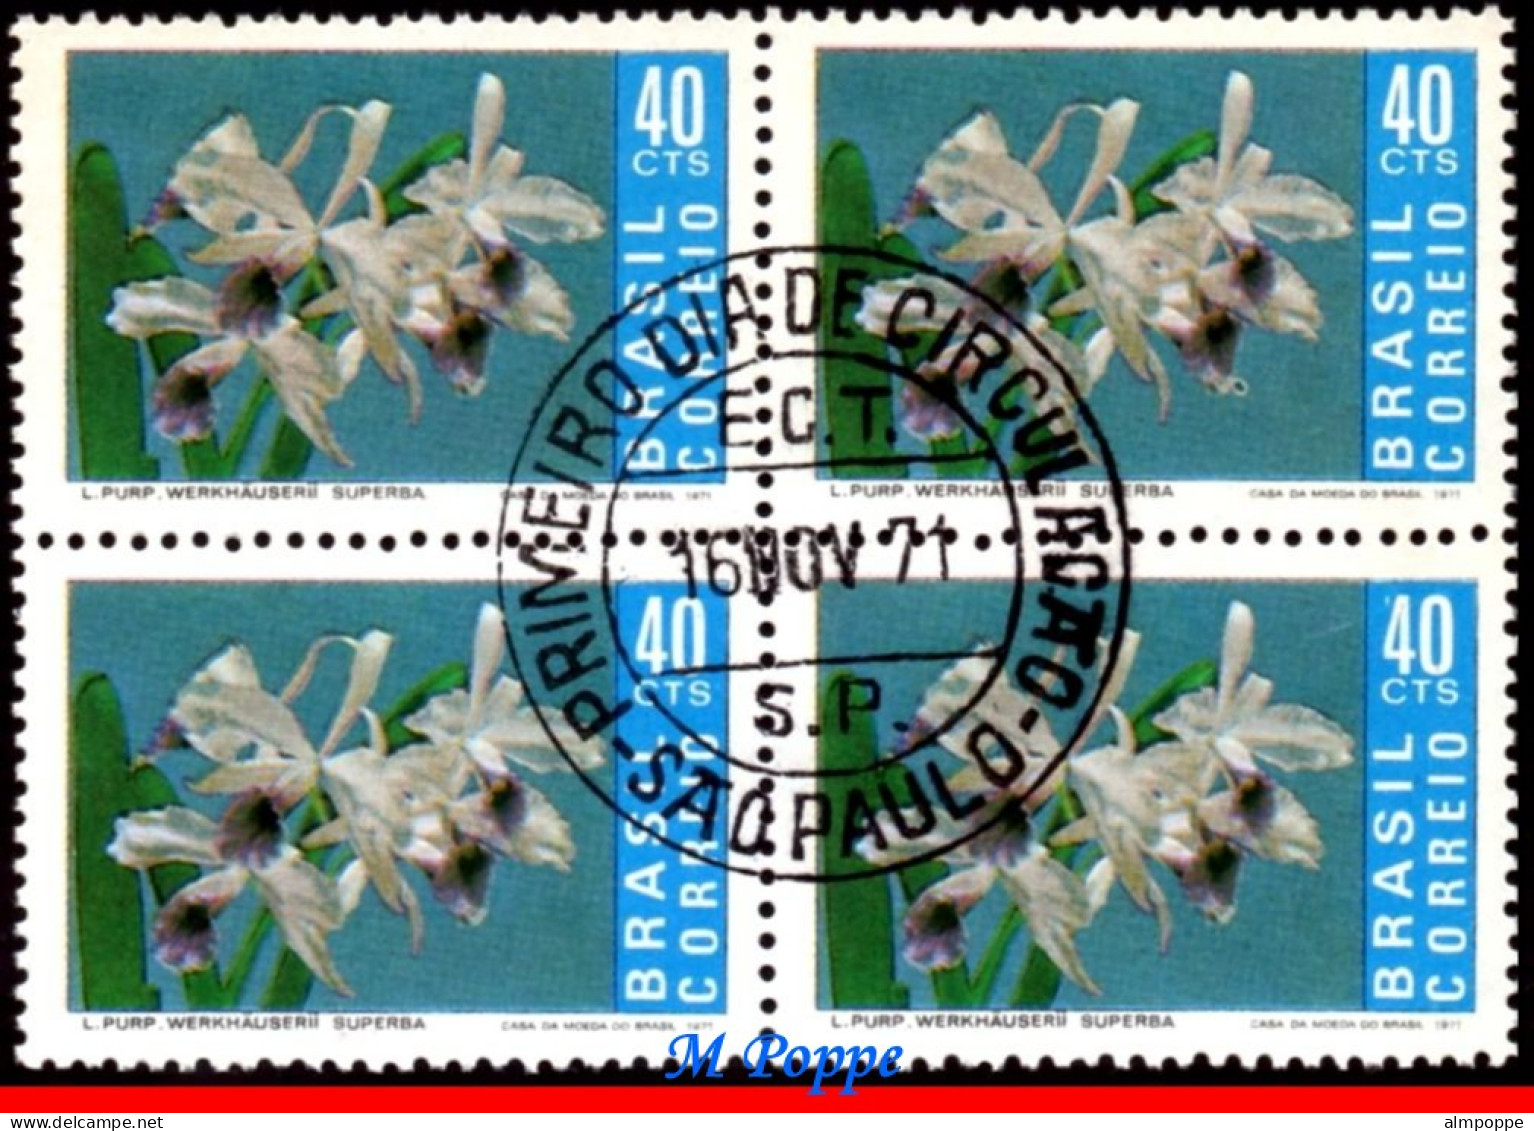 Ref. BR-1203-QC2 BRAZIL 1971 - ORCHID, FLORA, MI# 1297,BLOCK CANCELED 1ST DAY NH, FLOWERS, PLANTS 4V Sc# 1203 - Used Stamps